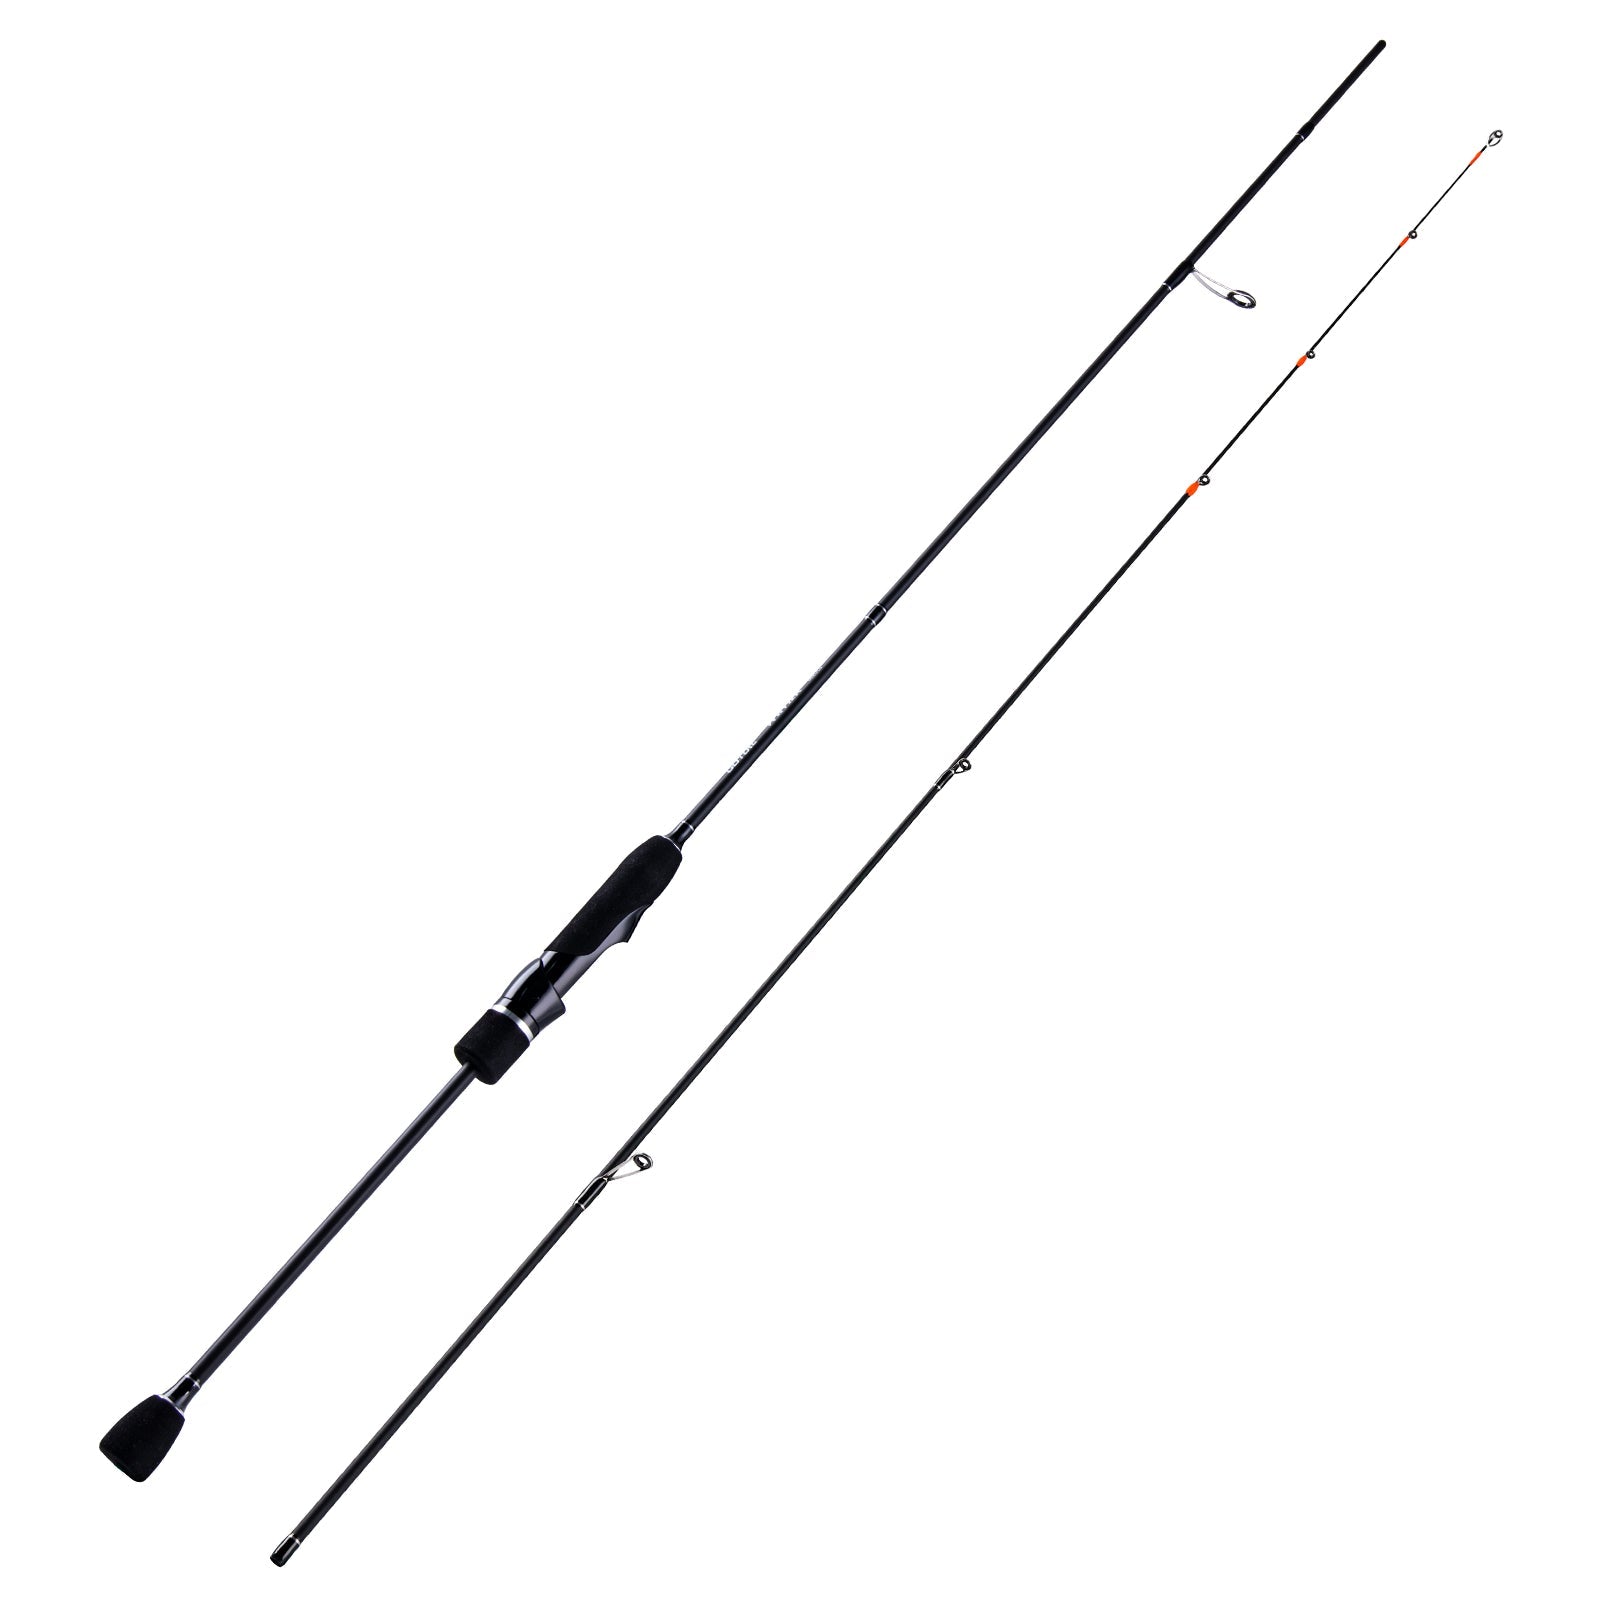 Goture 24T Carbon Fiber Casting/Spinning Rods for Freshwater - Lightweight  2 Pieces Fishing Rod - Higher Visibility w/Orange Tips - Oxide Guide 